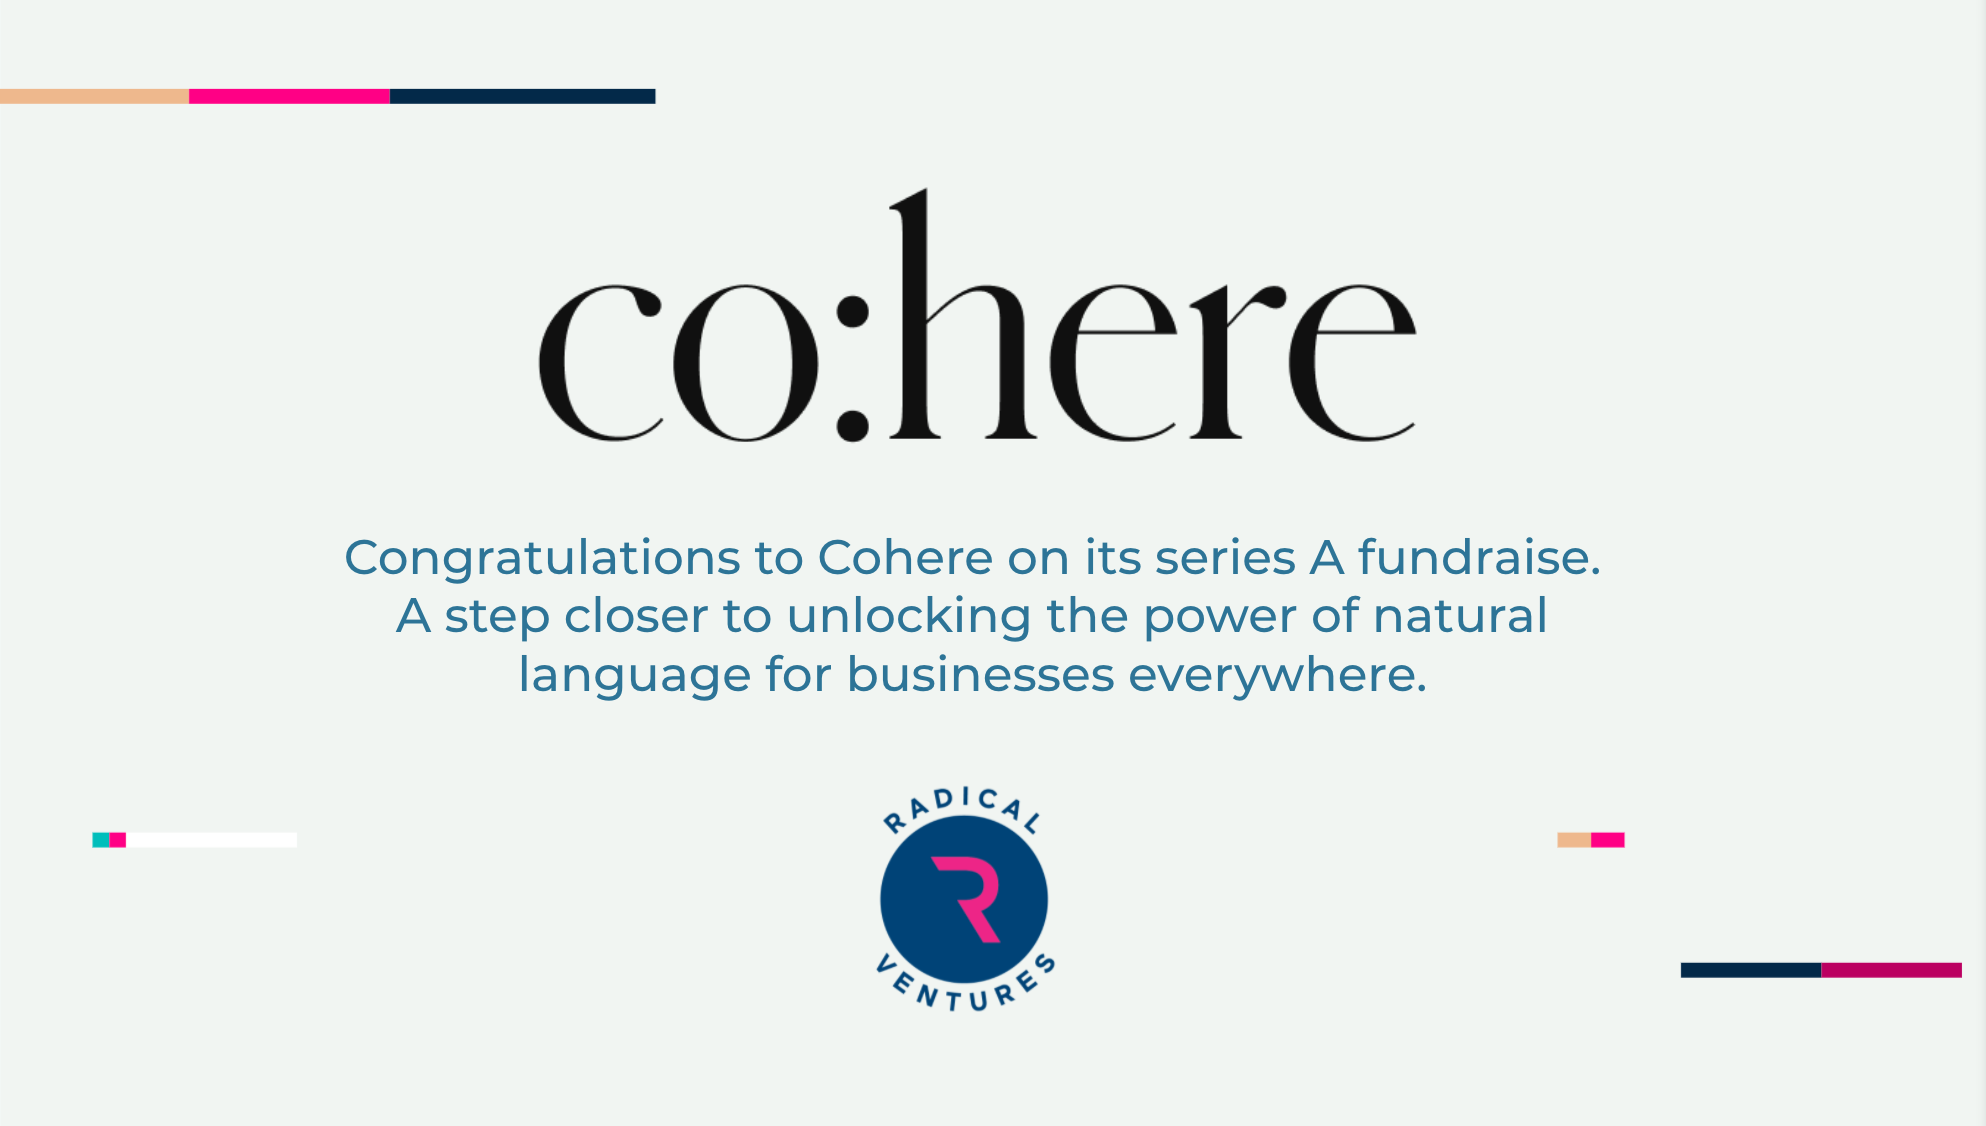 http://Cohere%20raises%20$40%20million%20Series%20A%20financing%20to%20make%20NLP%20safe%20and%20accessible%20to%20any%20business